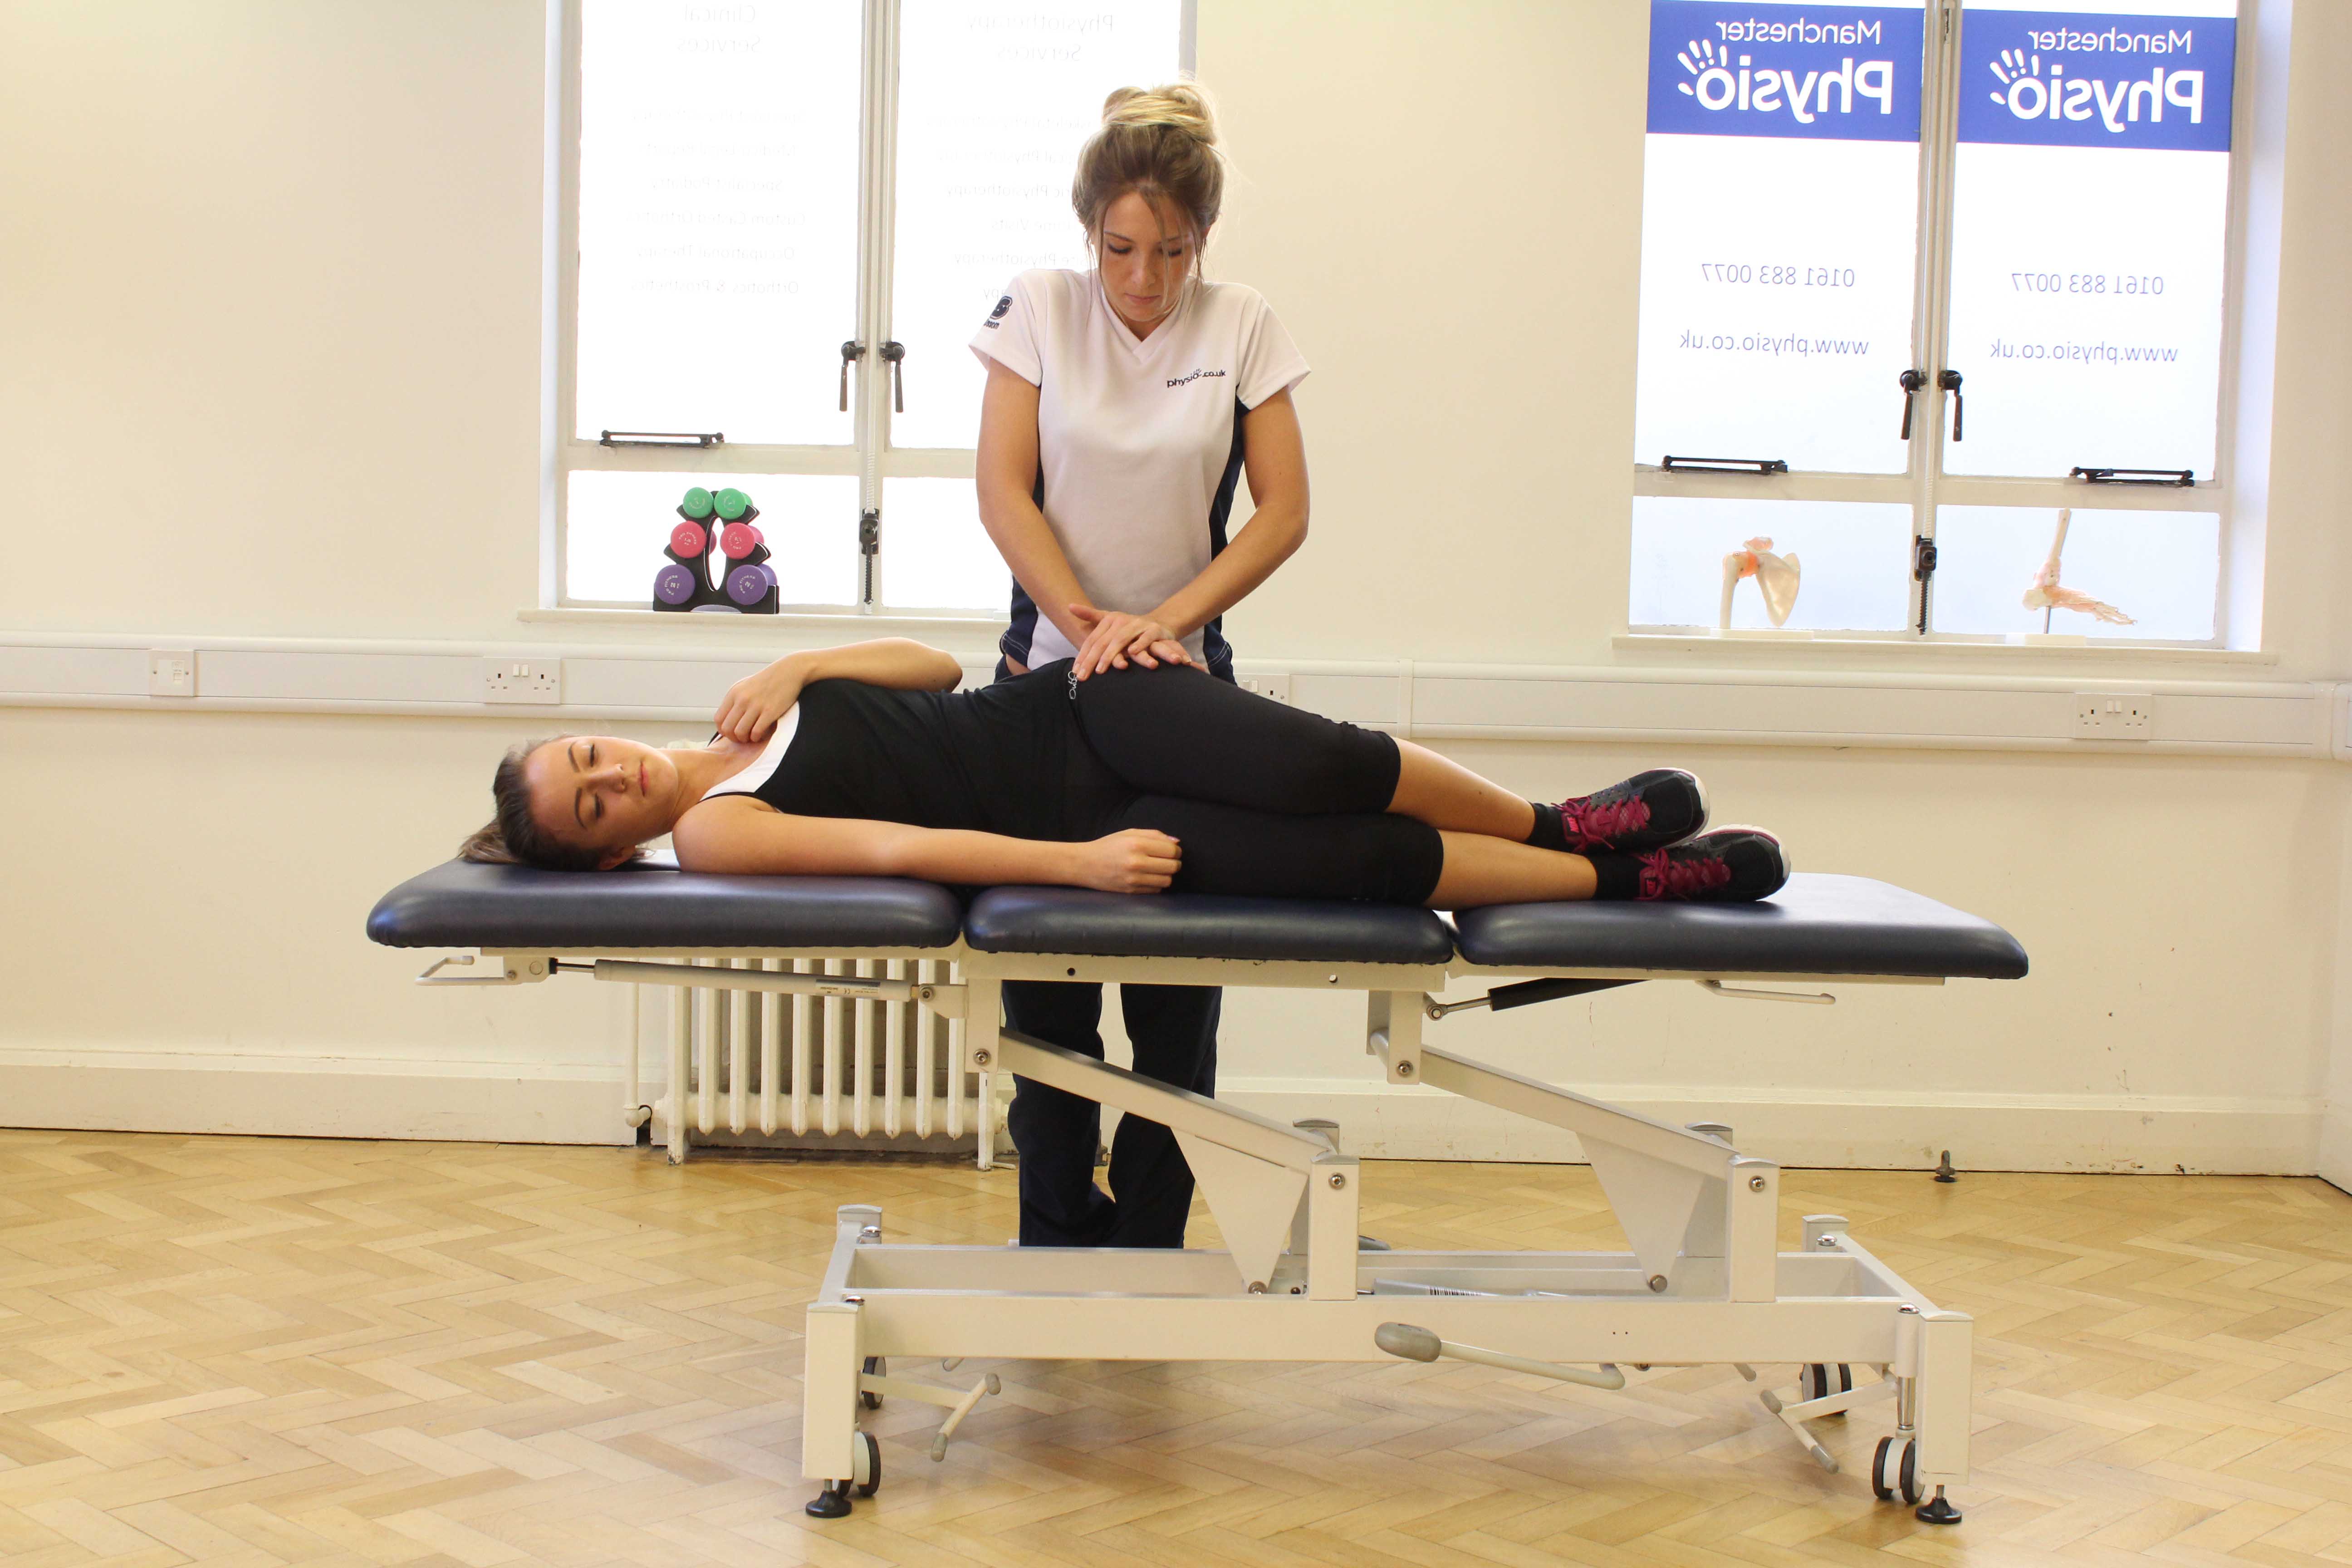 Lower vertebrea mobilisation and massage techniques applied by an experienced therapist